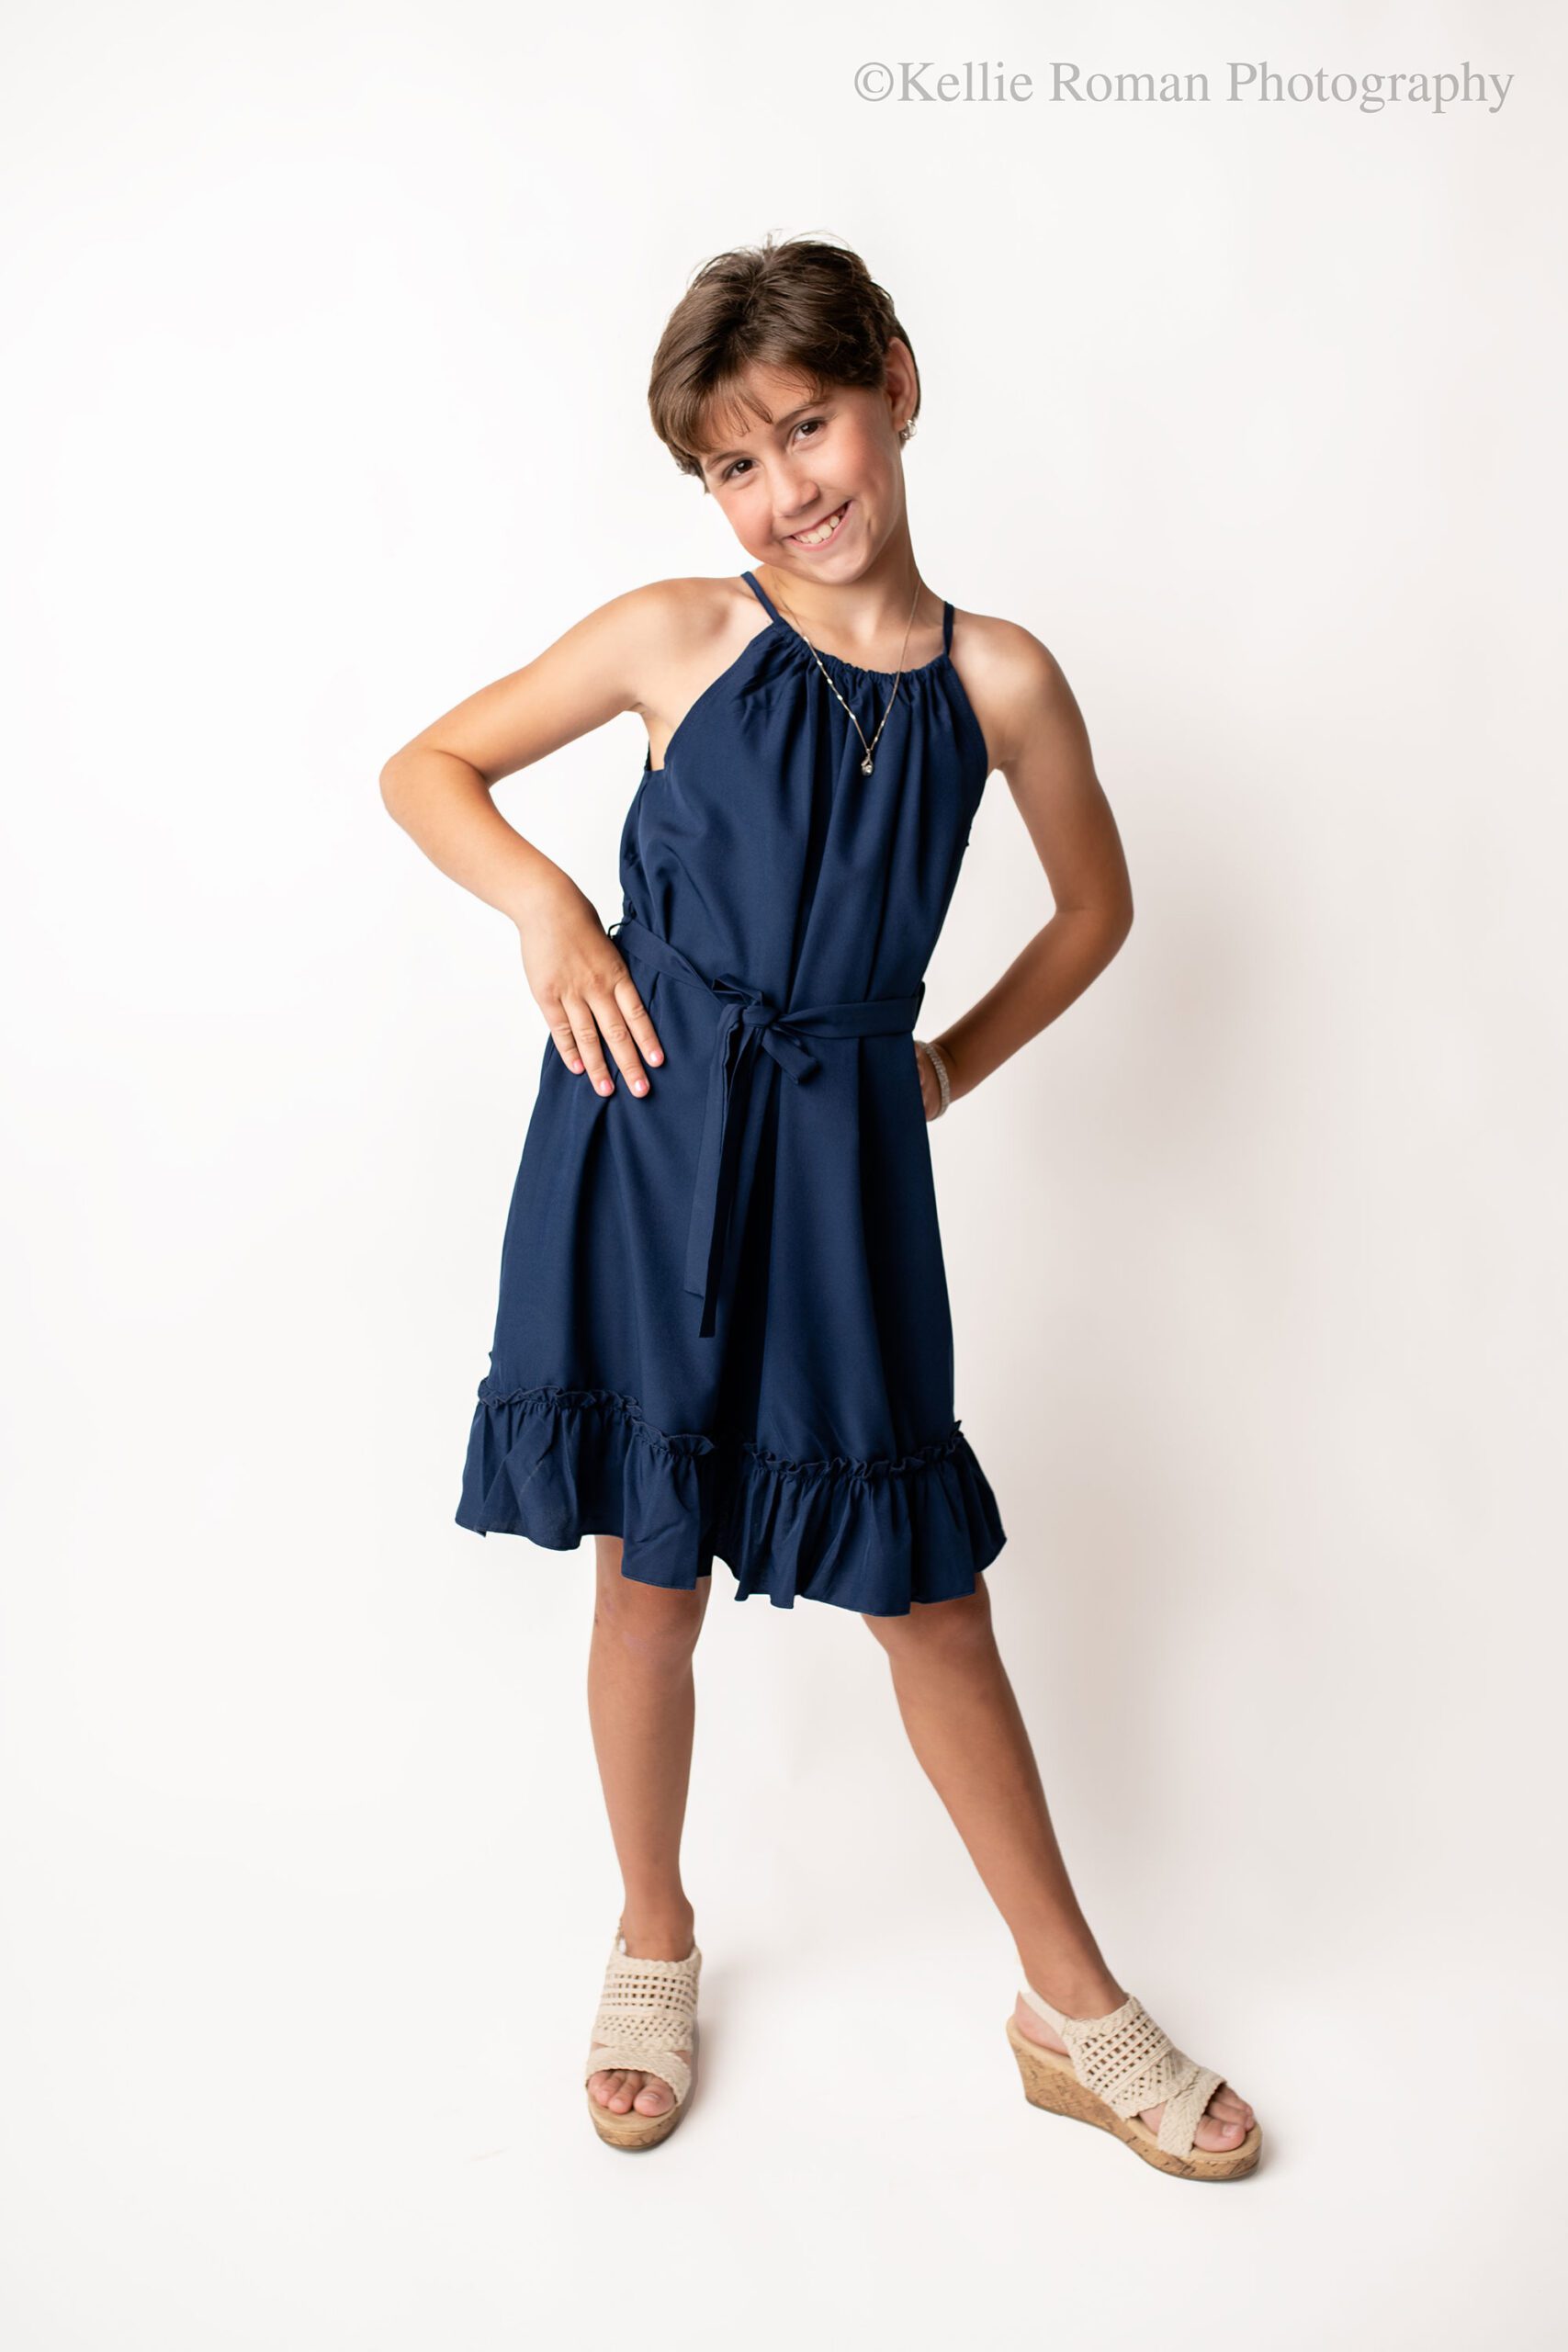 milwaukee birthday photos. 10 year old girl posing with hands on her hips in milwaukee photography studio. she has short brown hair with a navy dress and tan sandals. 